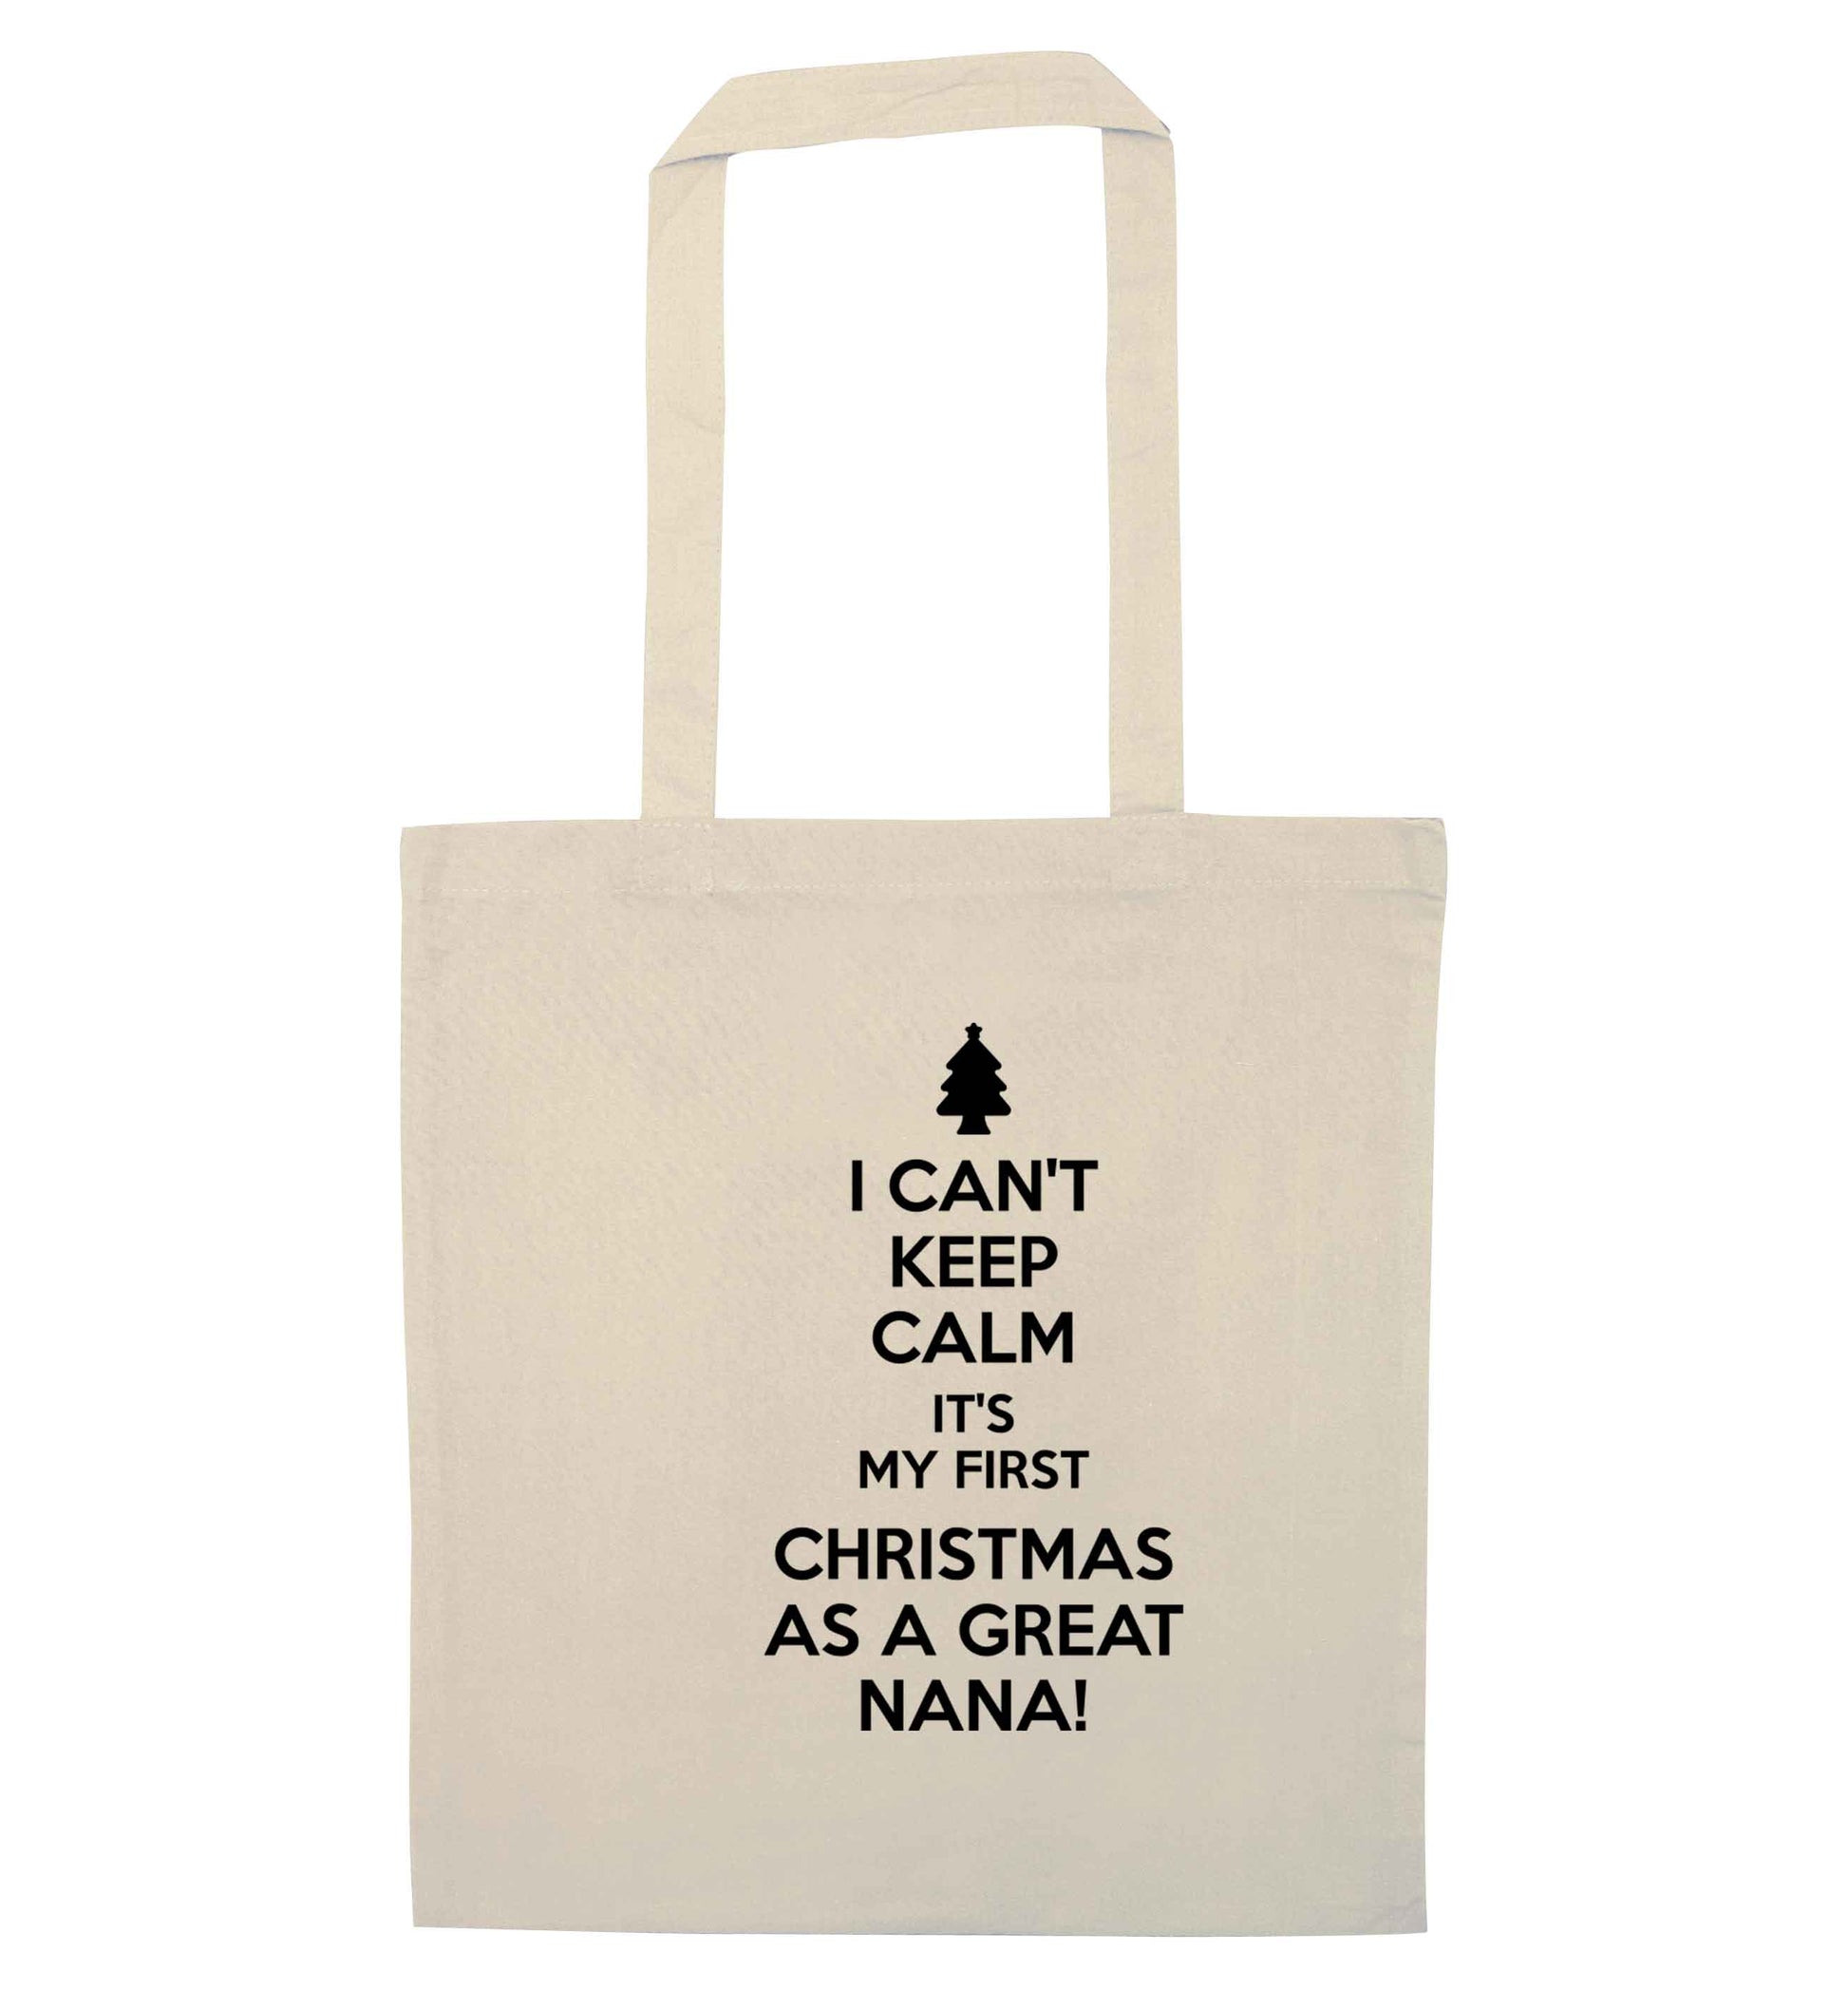 I can't keep calm it's my first Christmas as a great nana! natural tote bag